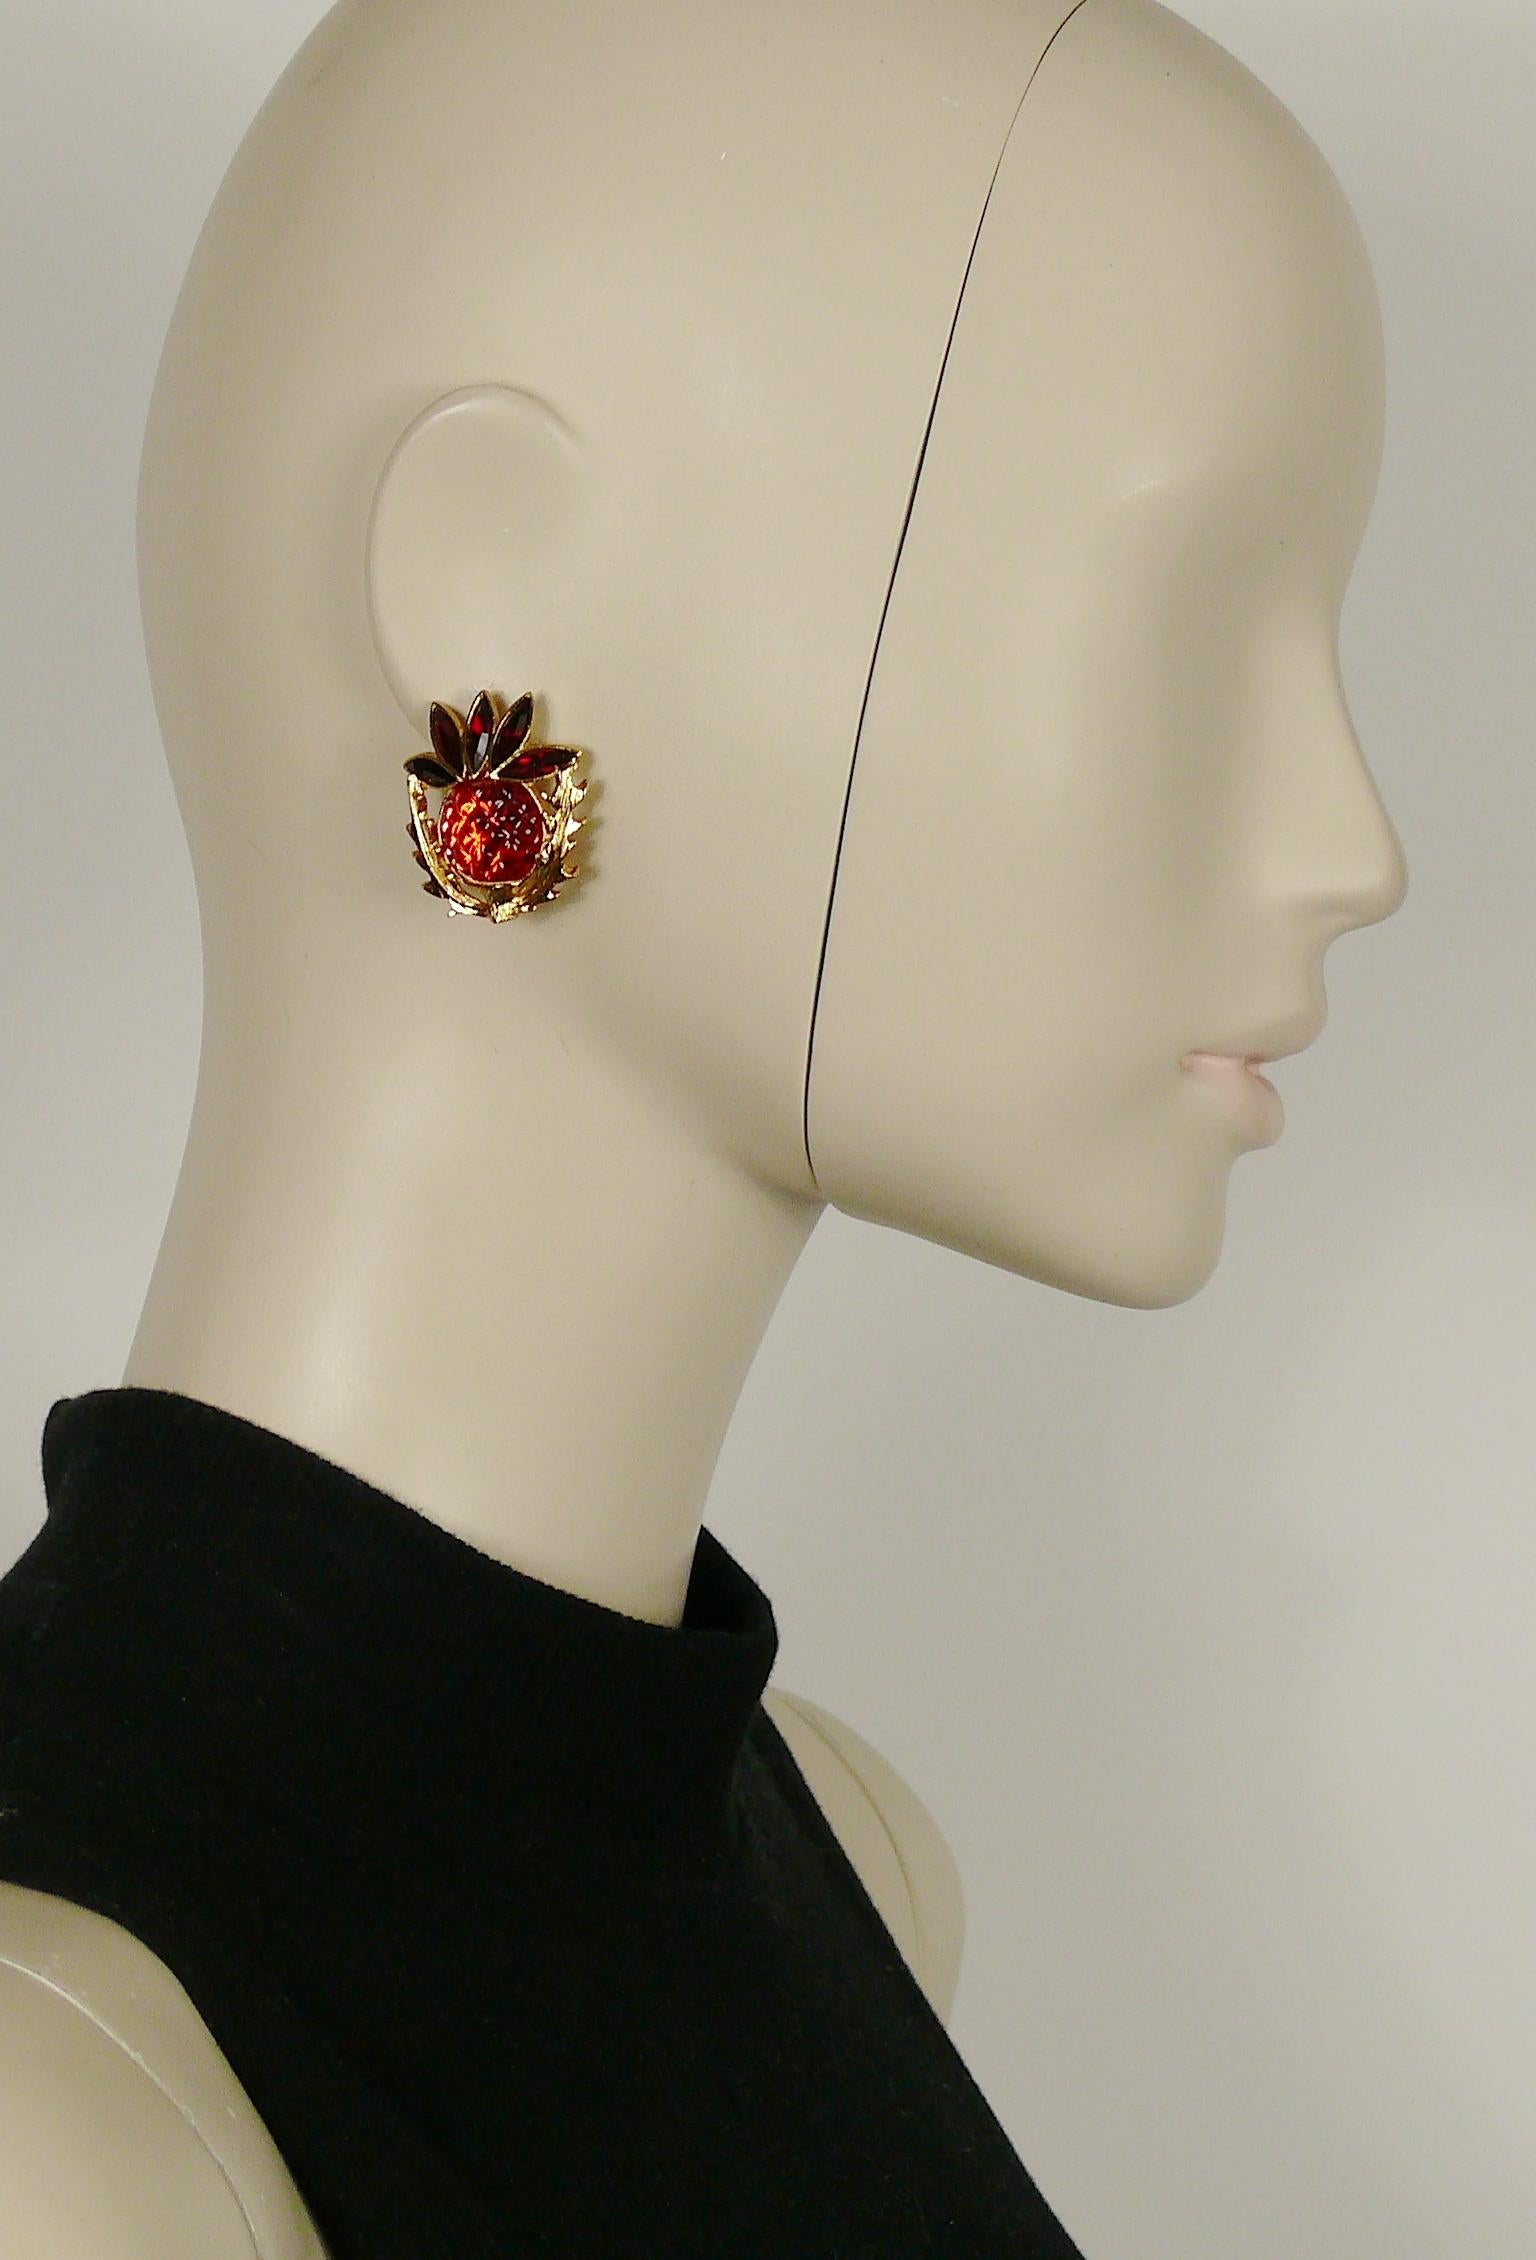 YVES SAINT LAURENT vintage textured red lucite resin thistle motif clip-on earrings embellished with crystals on top.

Embossed YVES SAINT LAURENT Rive Gauched Made in France.

Indicative measurements : approx. 3.3 cm x 2.8 cm (1.30 inches x 1.10